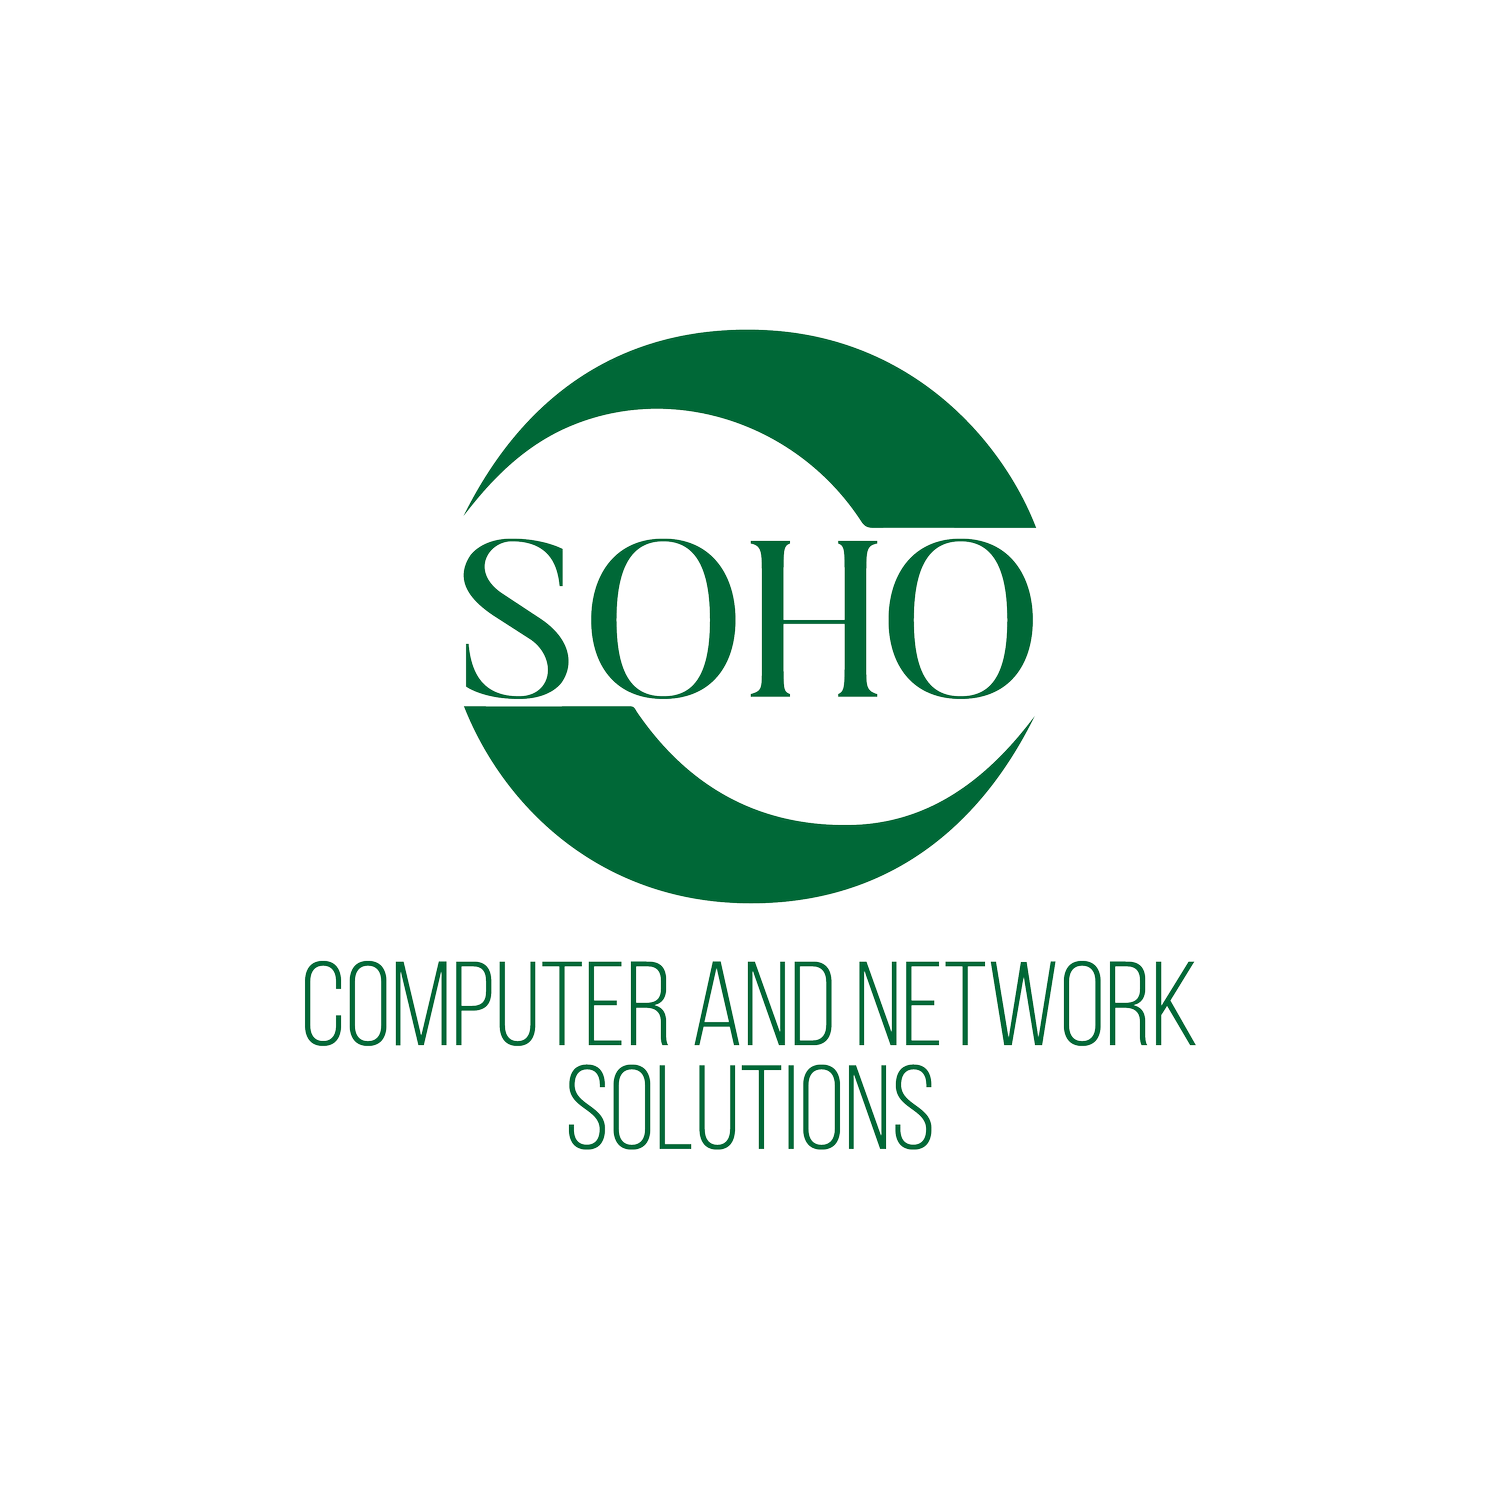 SOHO Computer and Network Solutions